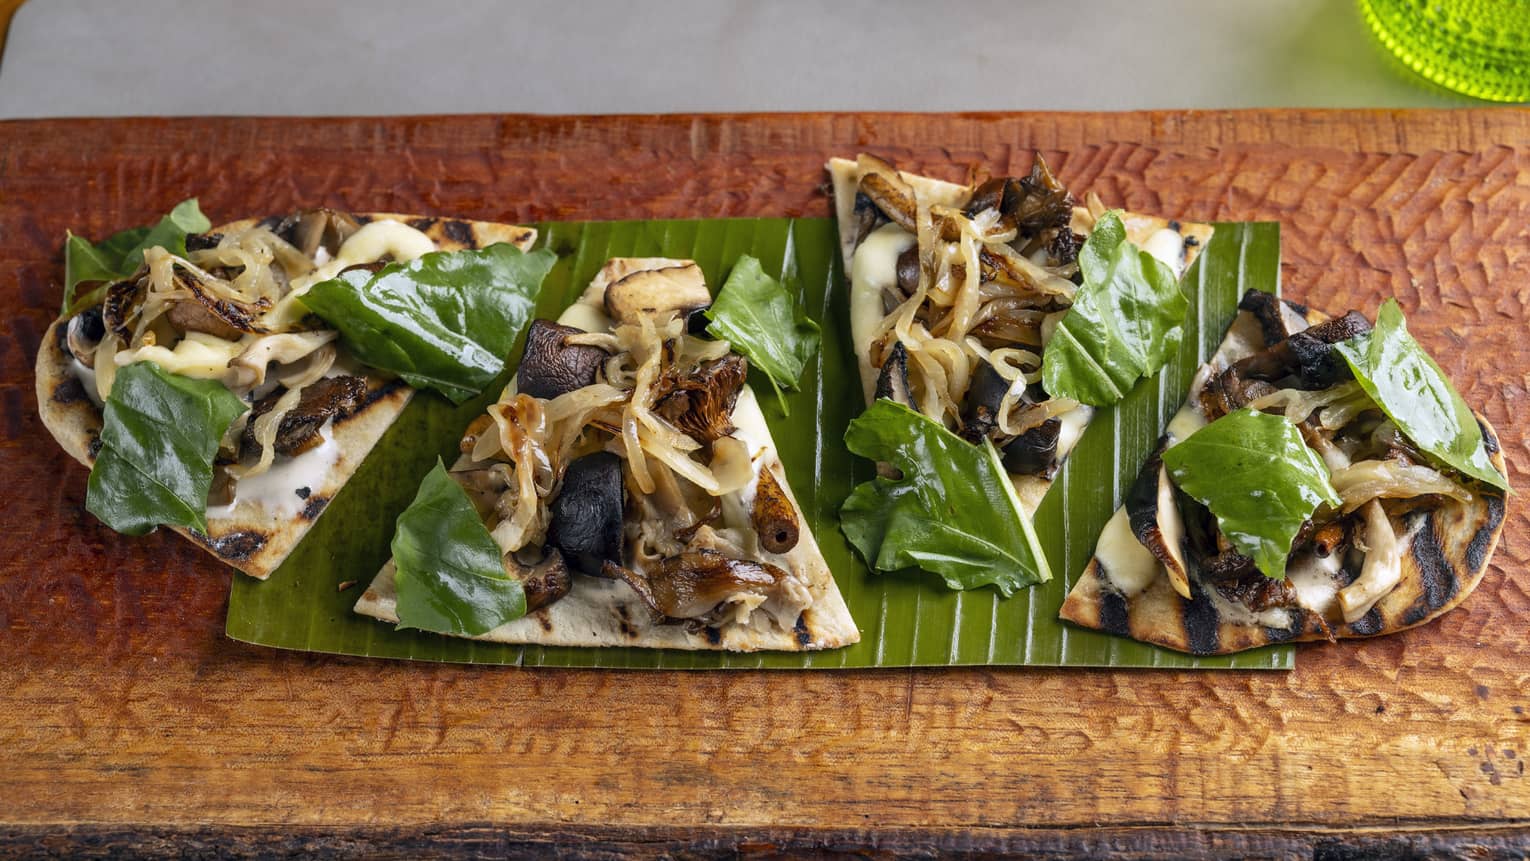 Mushroom fugazzeta cut into four slices and garnished with arugula served on a wooden platter